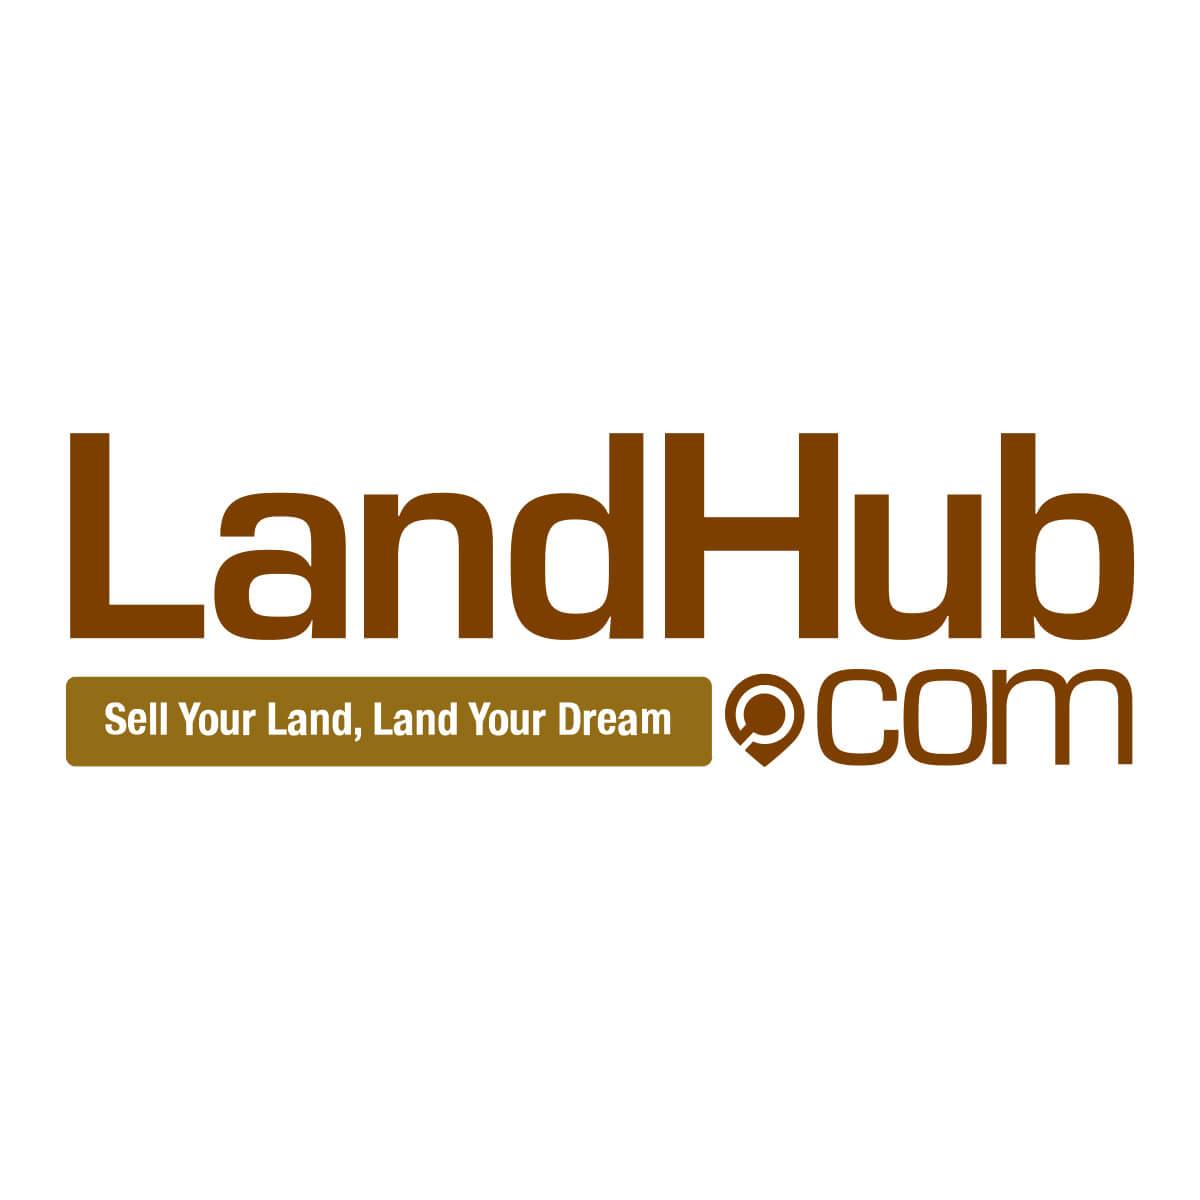 sell land using facebook advertising: prepare your campaigns properly